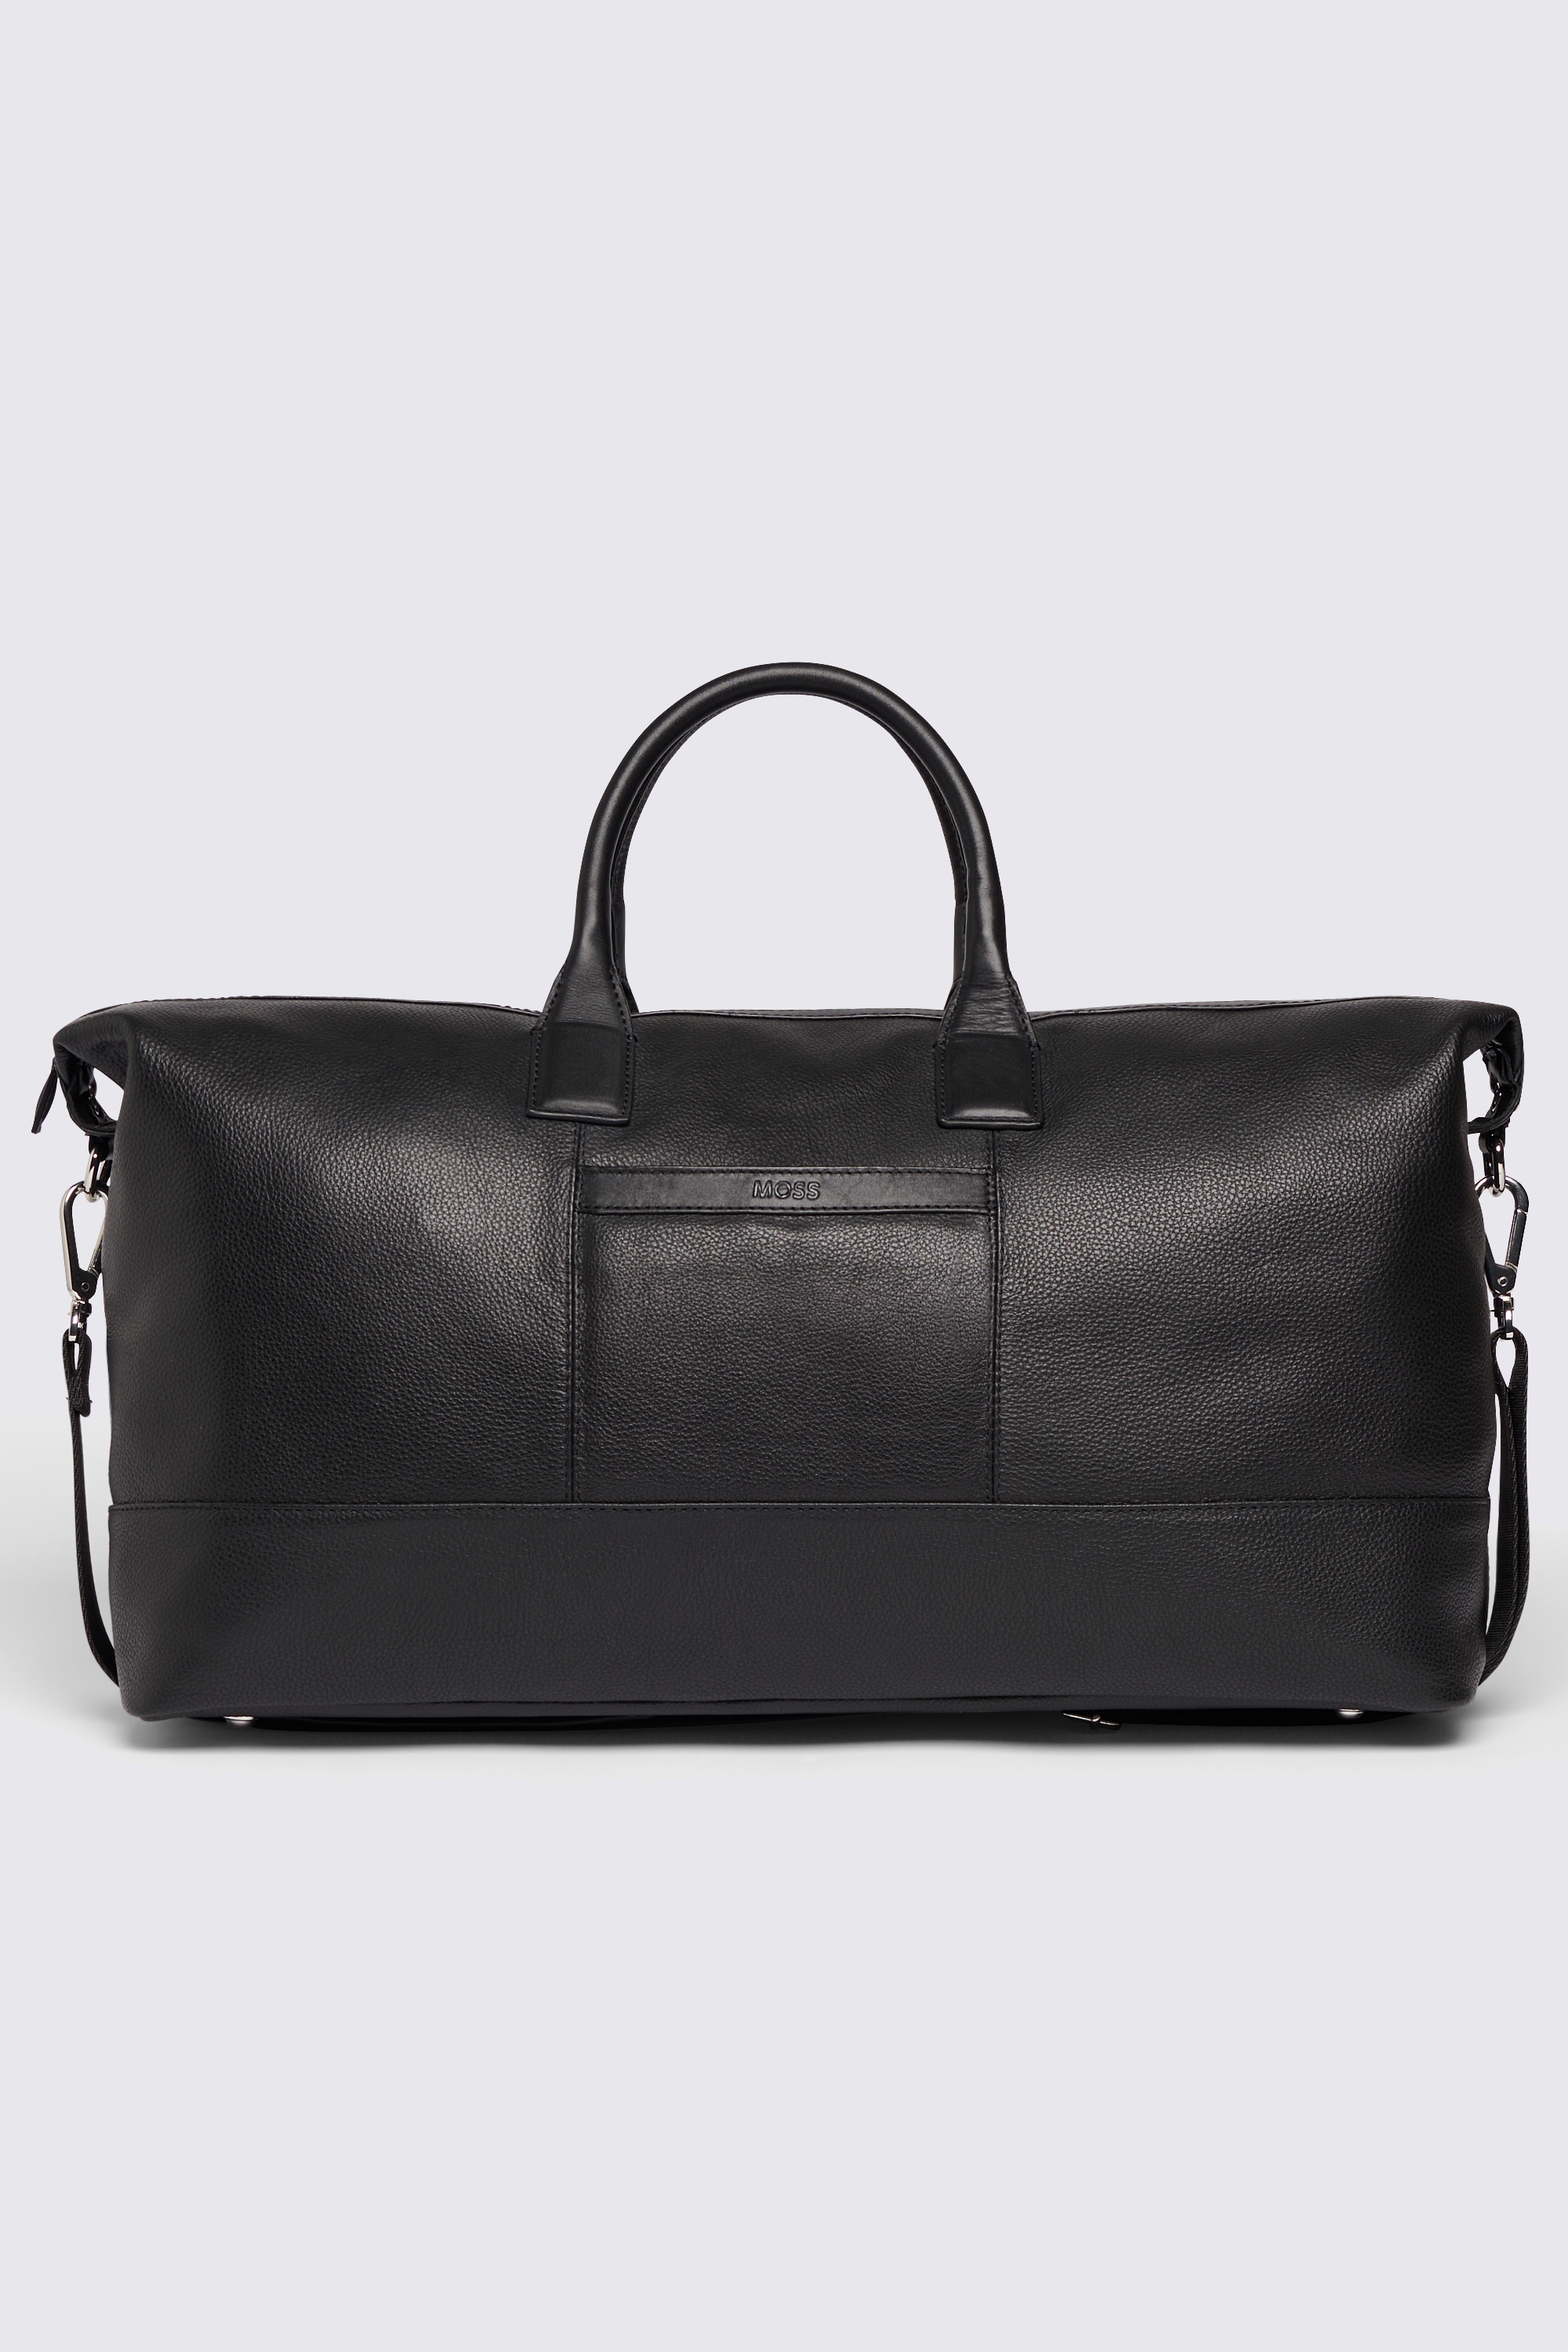 Black Grained Leather Holdall | Buy Online at Moss